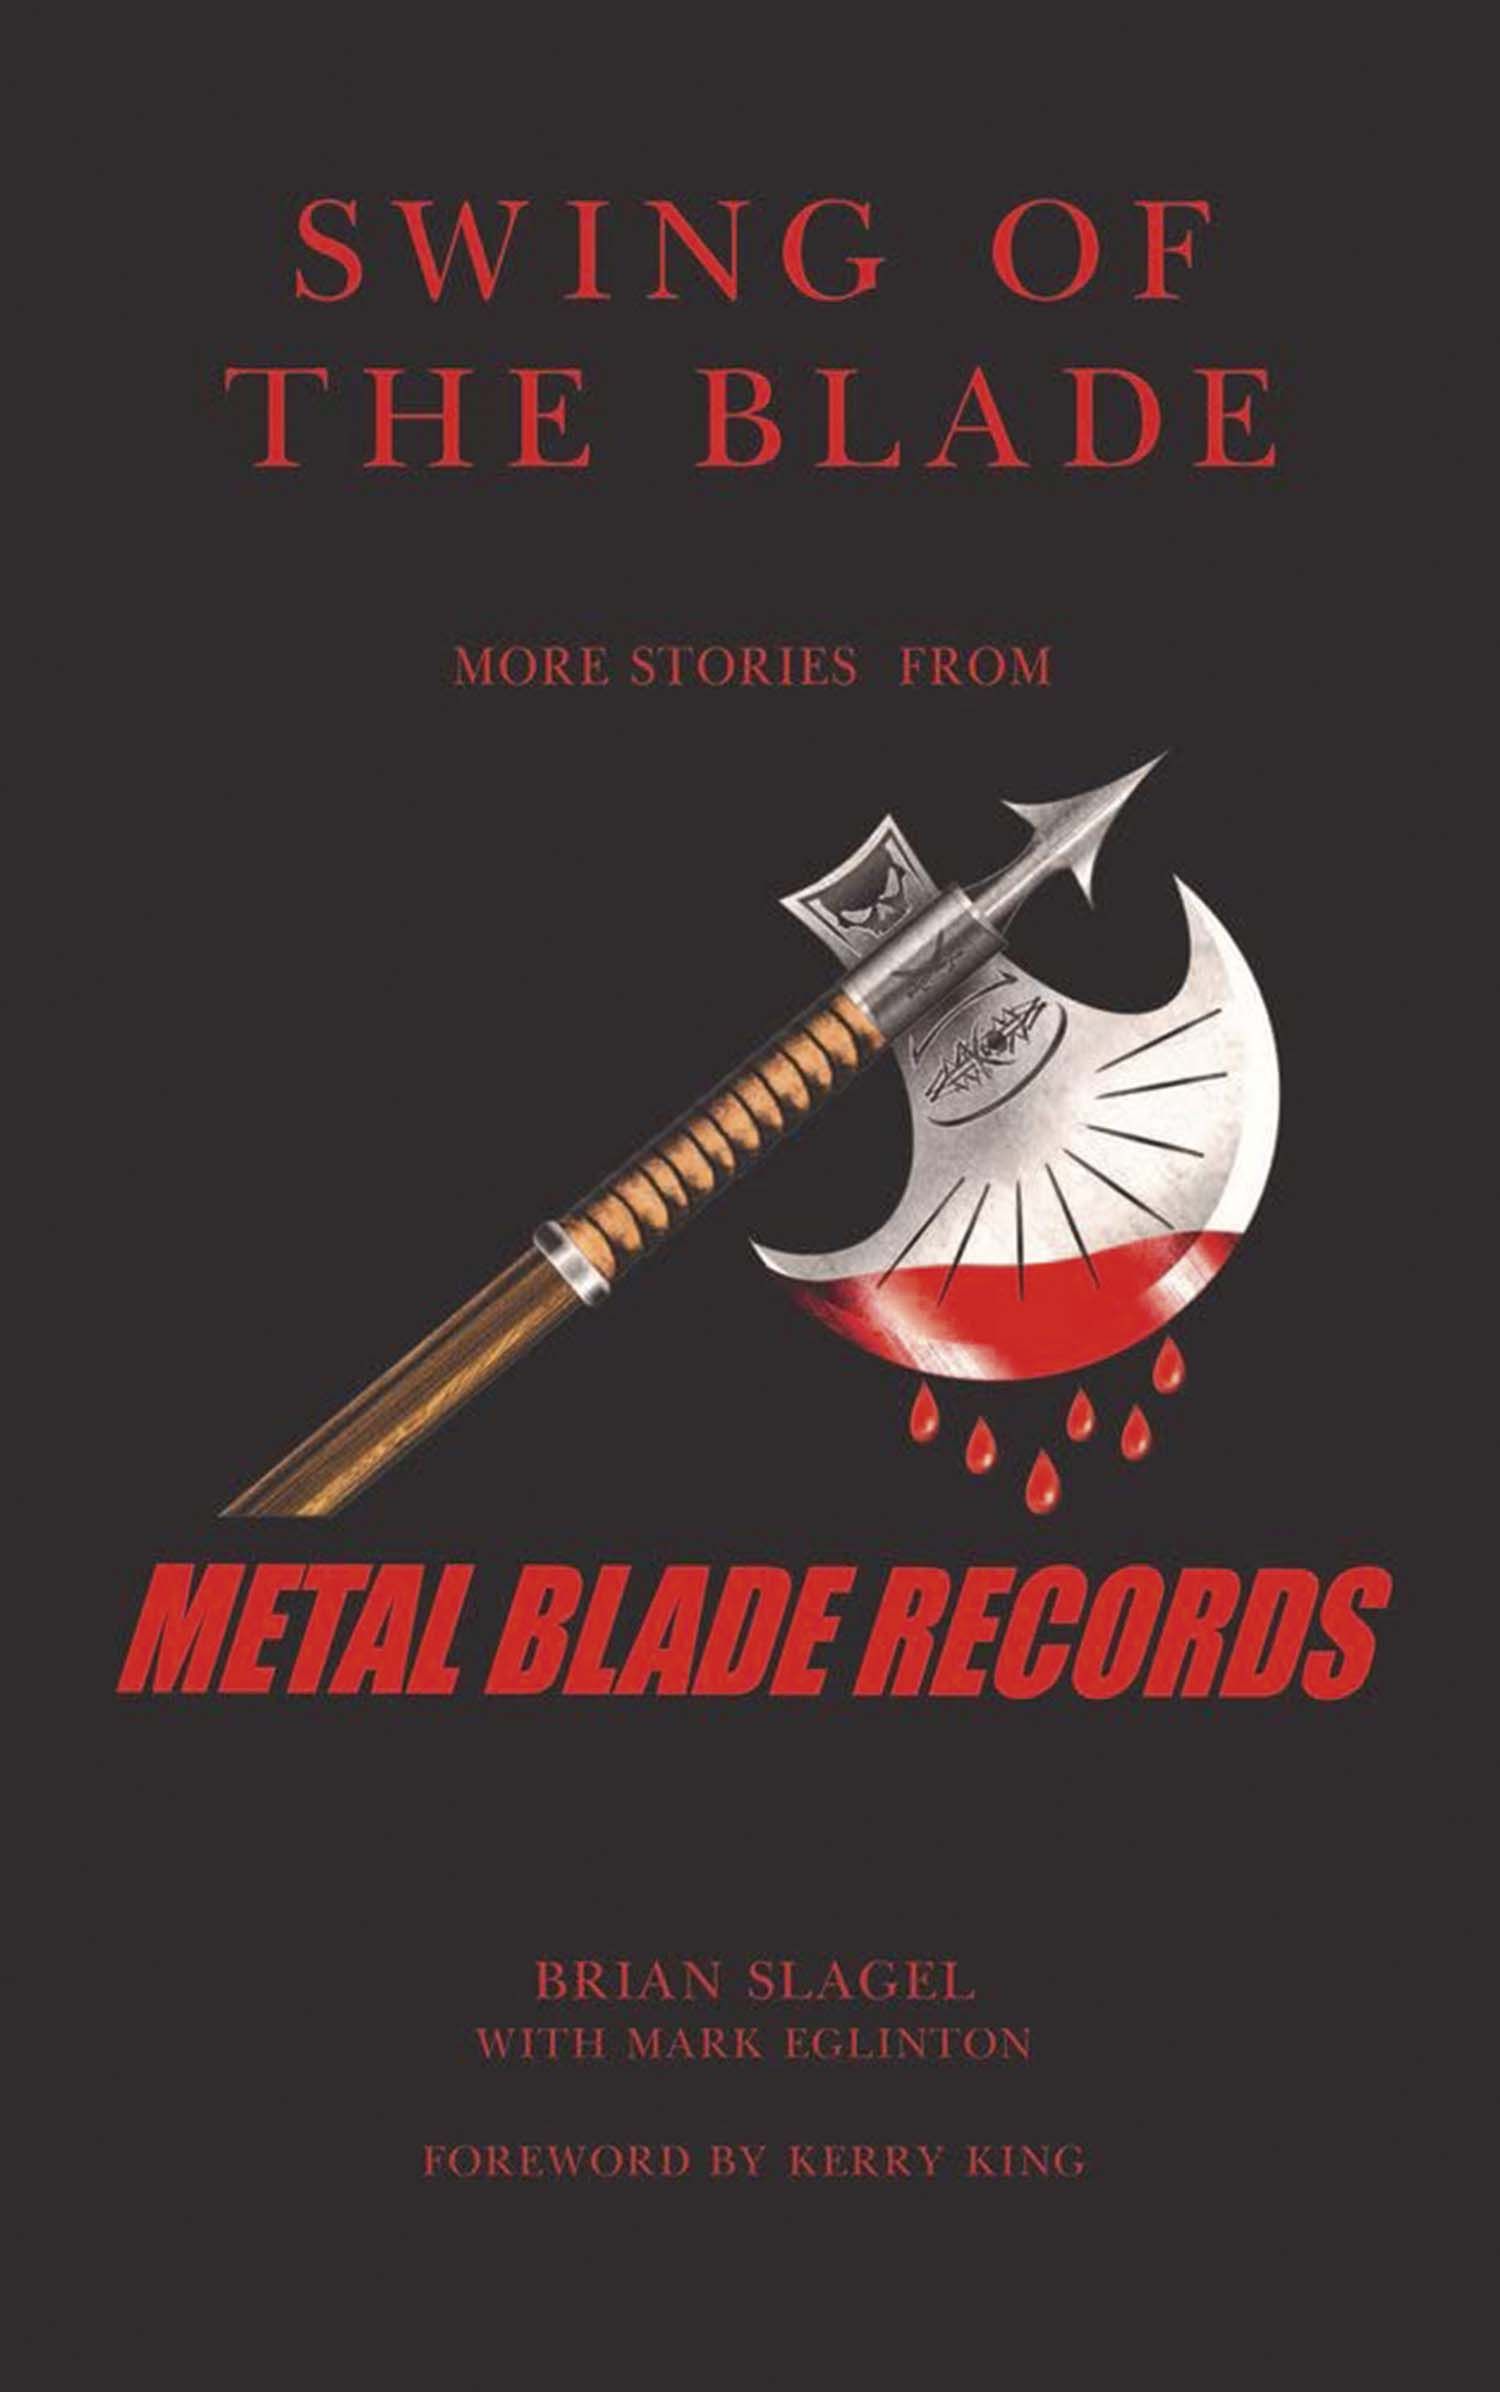 SWING OF THE BLADE: More Stories From Metal Blade Records